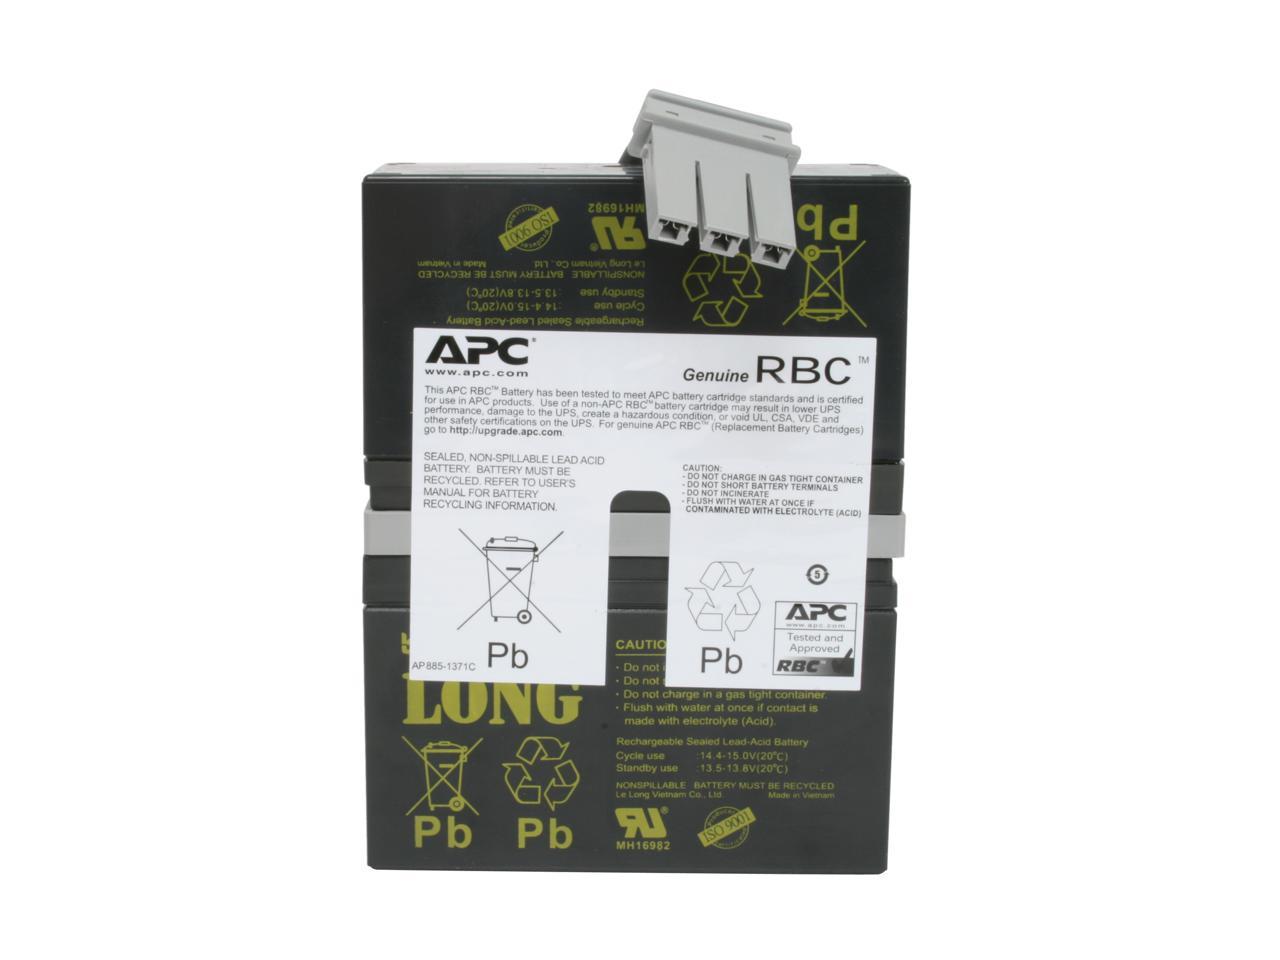 APC UPS Battery Replacement for APC Back-UPS Models BR1000, BX1000, BN1050, BN1250, BR1200, BR500, BR800, BR900, BX1200, BX800, BX900 and select others (RBC32)